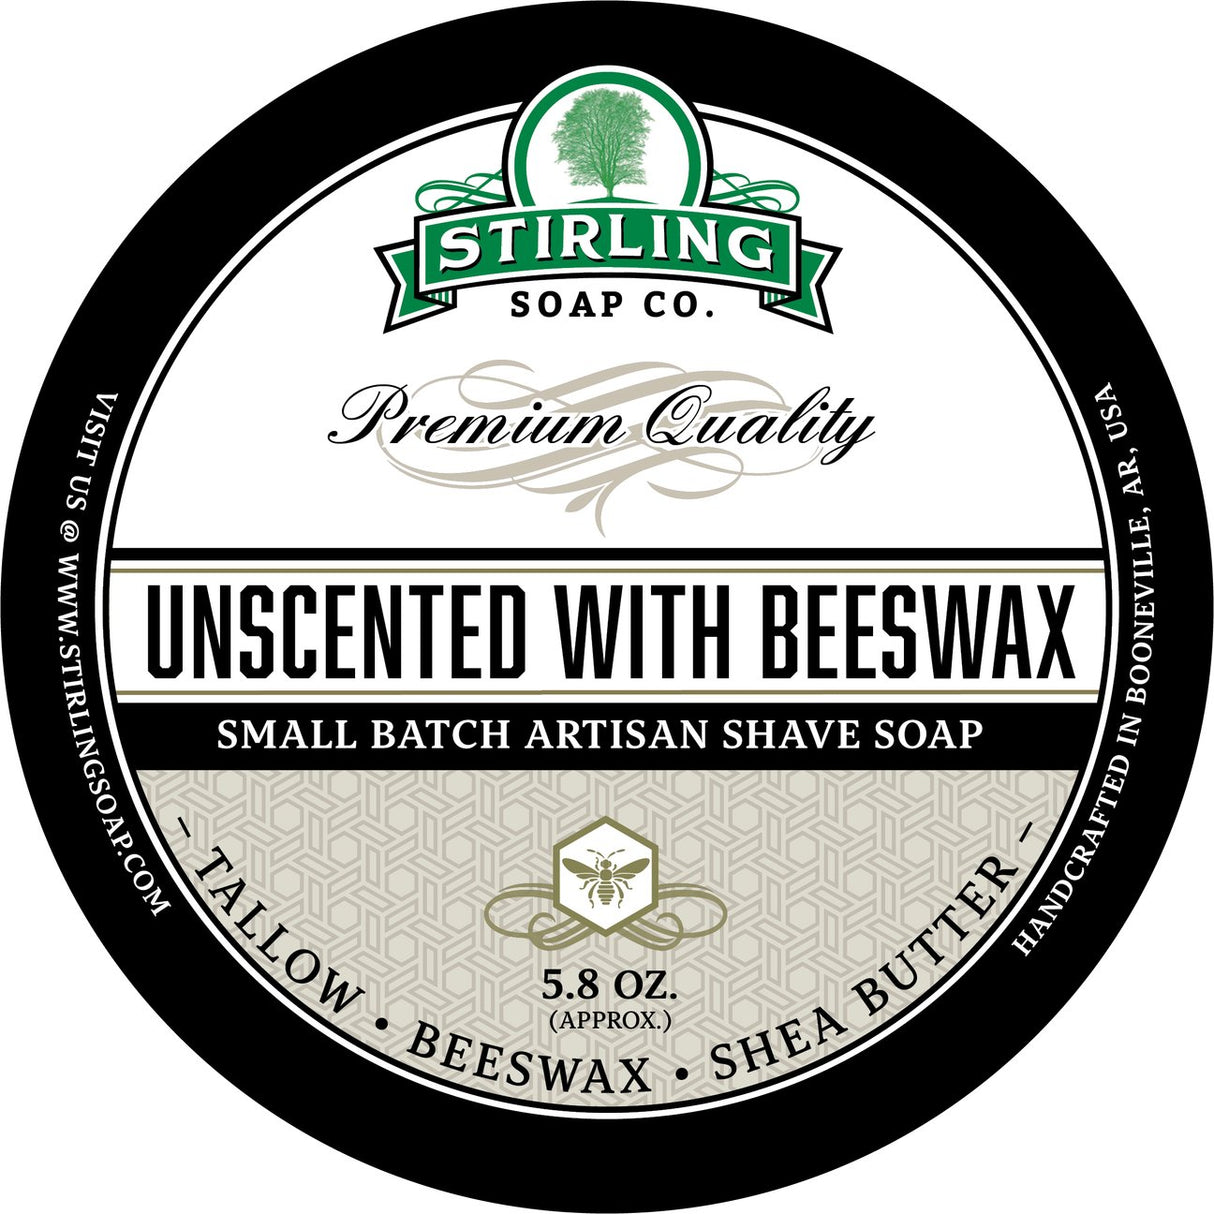 Stirling Soap Company - Shave Soap - Unscented with Beeswax